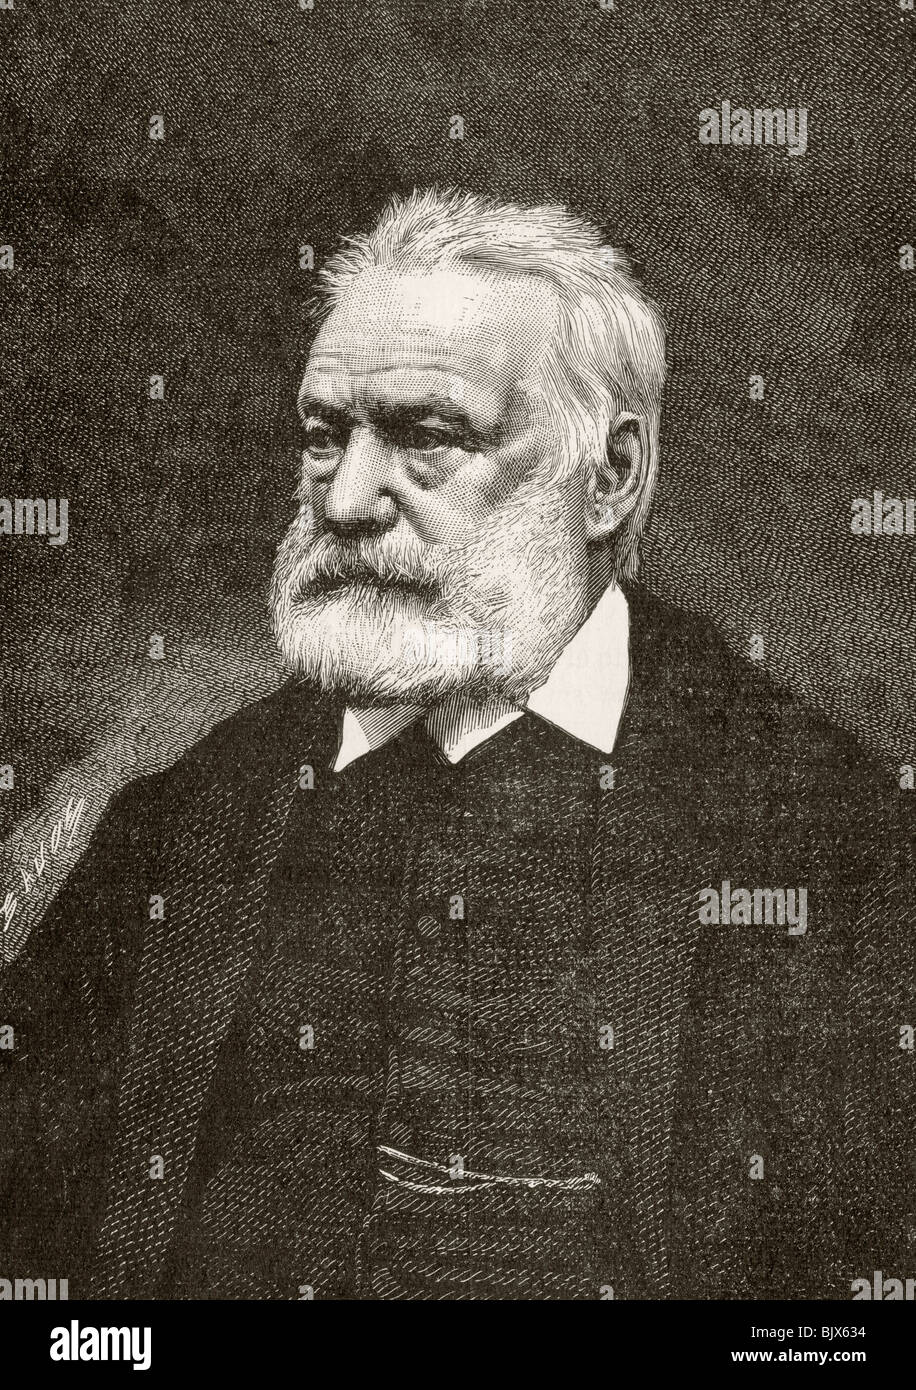 Victor Marie Hugo 1802 - 1885. French poet, novelist and dramatist. Stock Photo